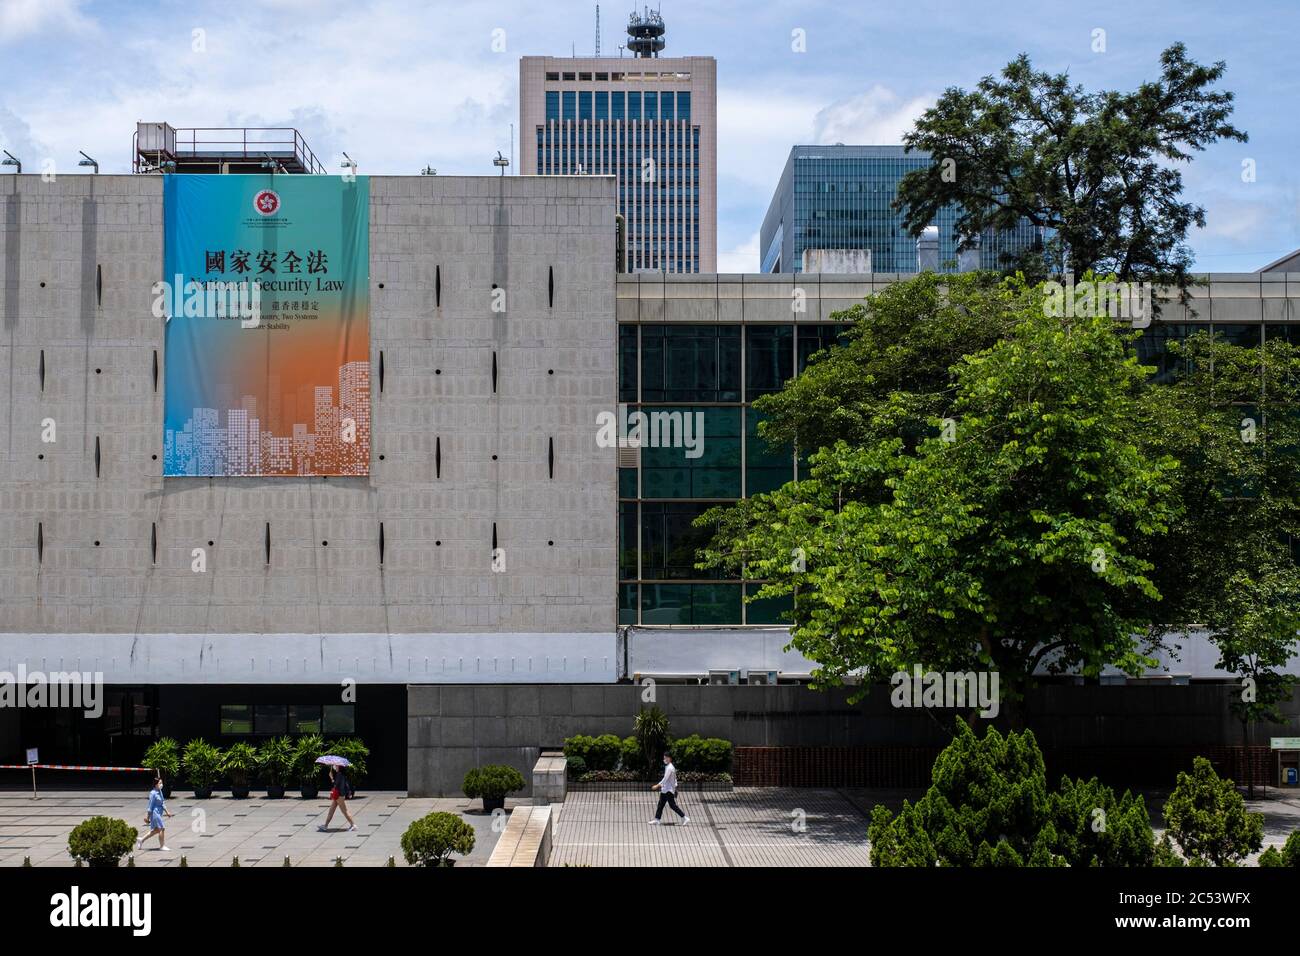 Hong Kong, Hong Kong. 30th June, 2020. A government sponsored advertisement promoting the new national security law display on a building in Hong Kong. Credit: Chan Long Hei/SOPA Images/ZUMA Wire/Alamy Live News Stock Photo